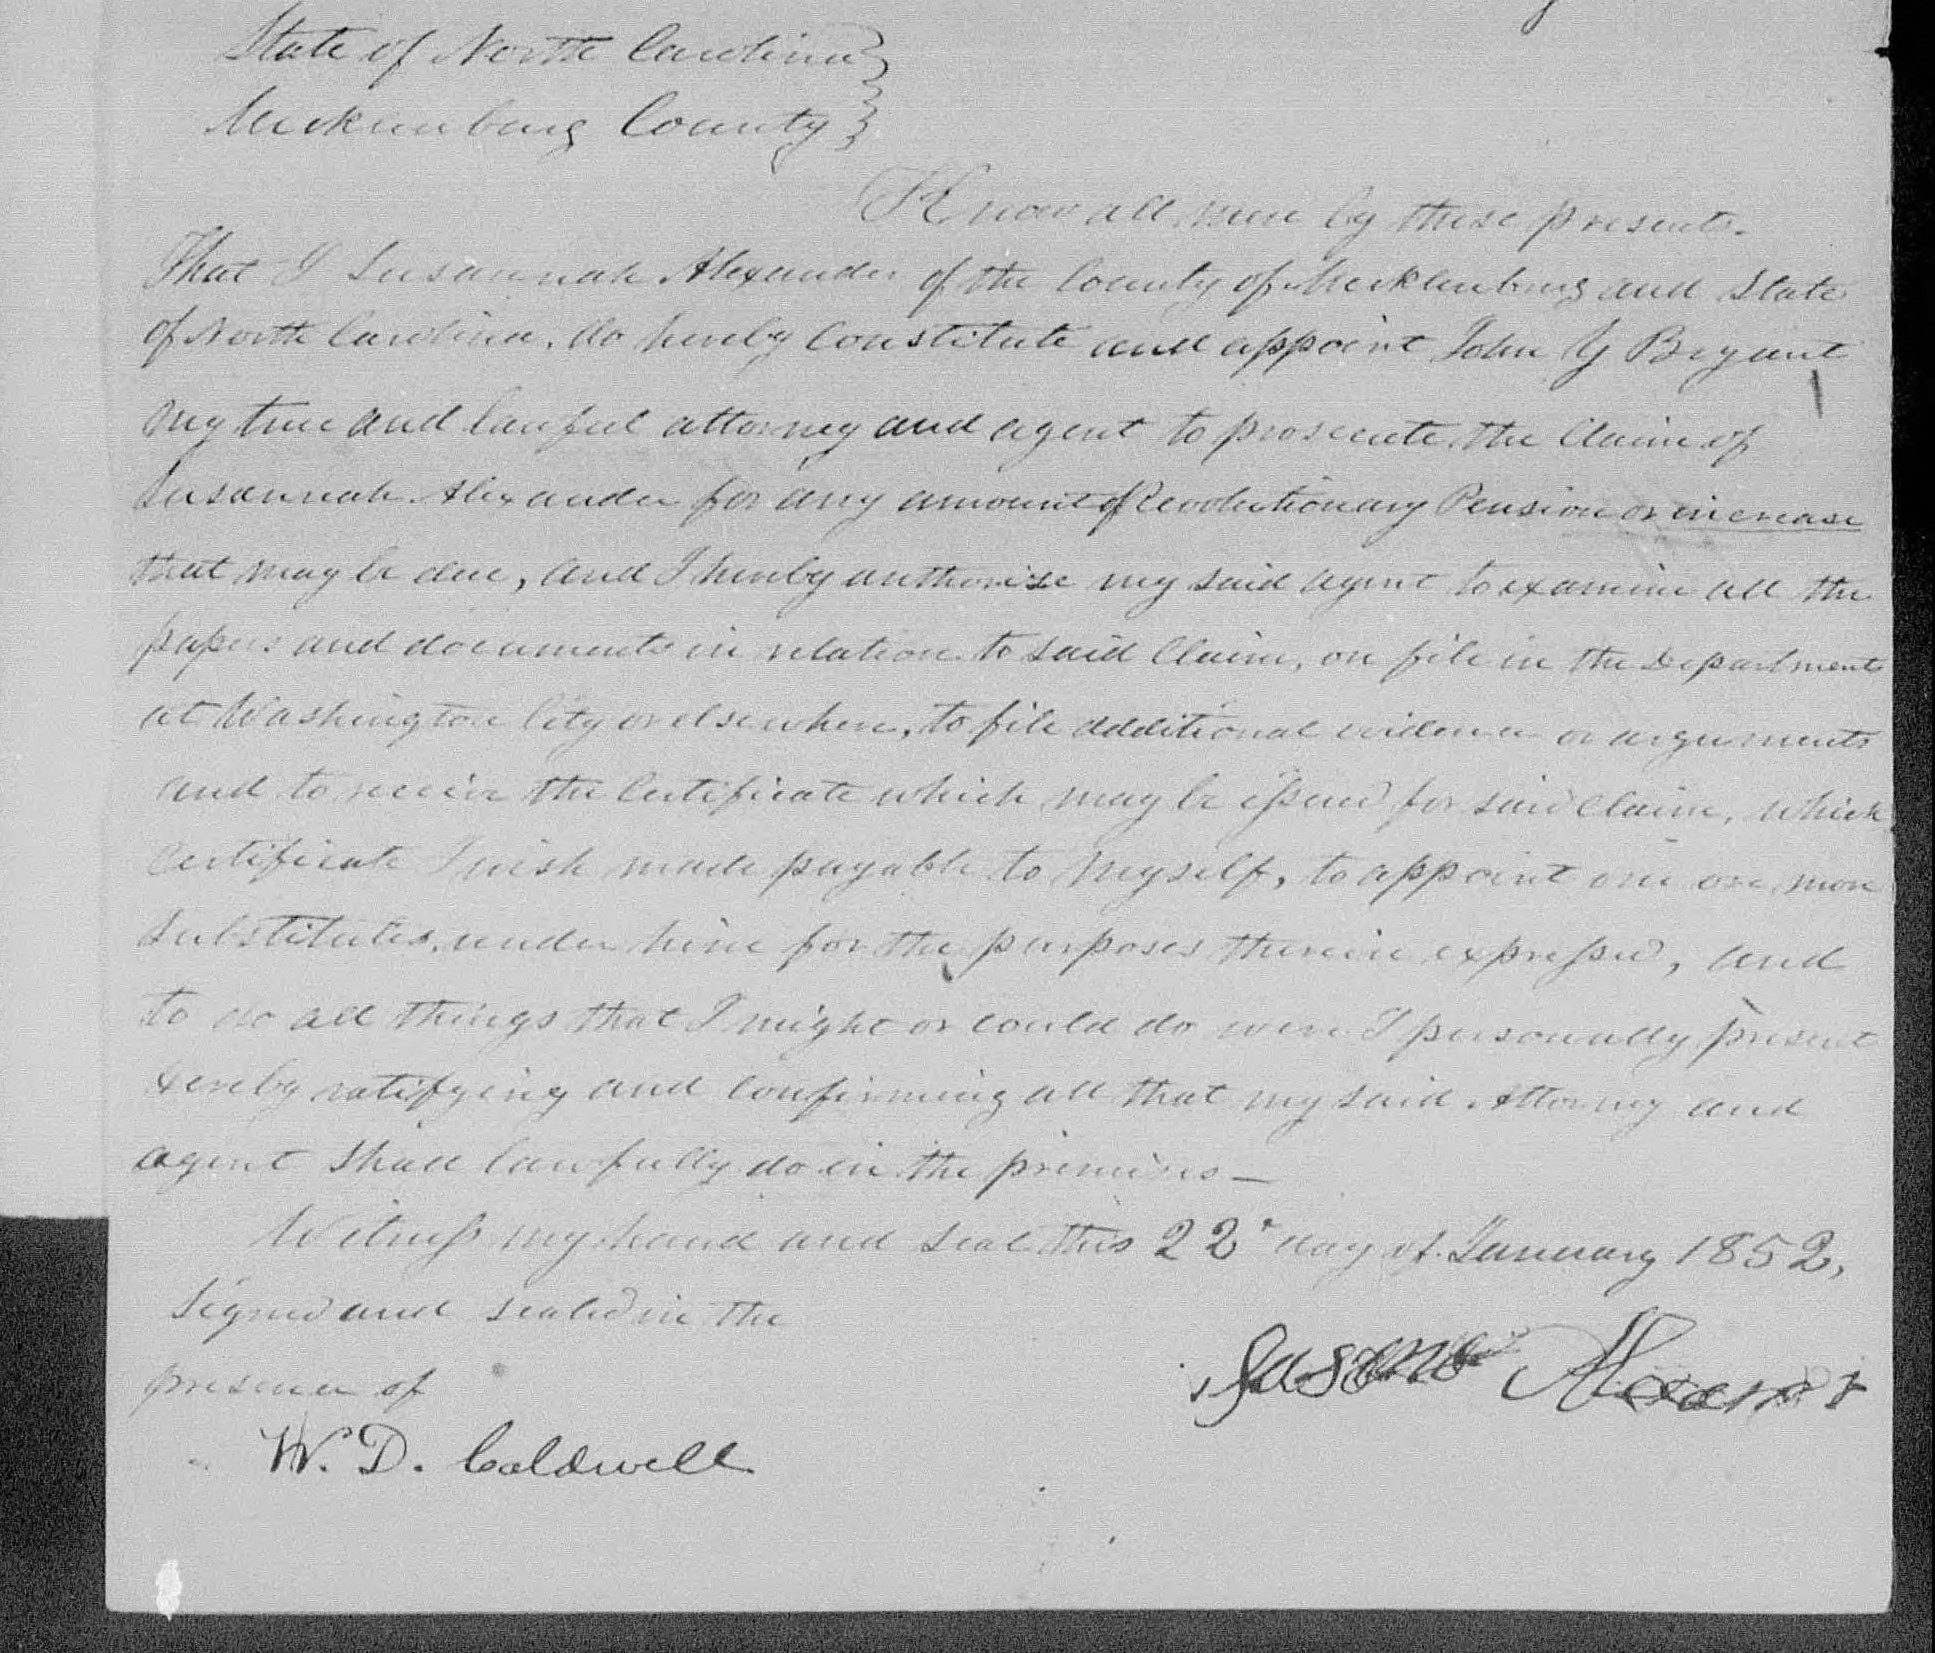 Appointment of John Y. Braynt and Suana Alexander's Power of Attorney, 22 January 1852, page 1